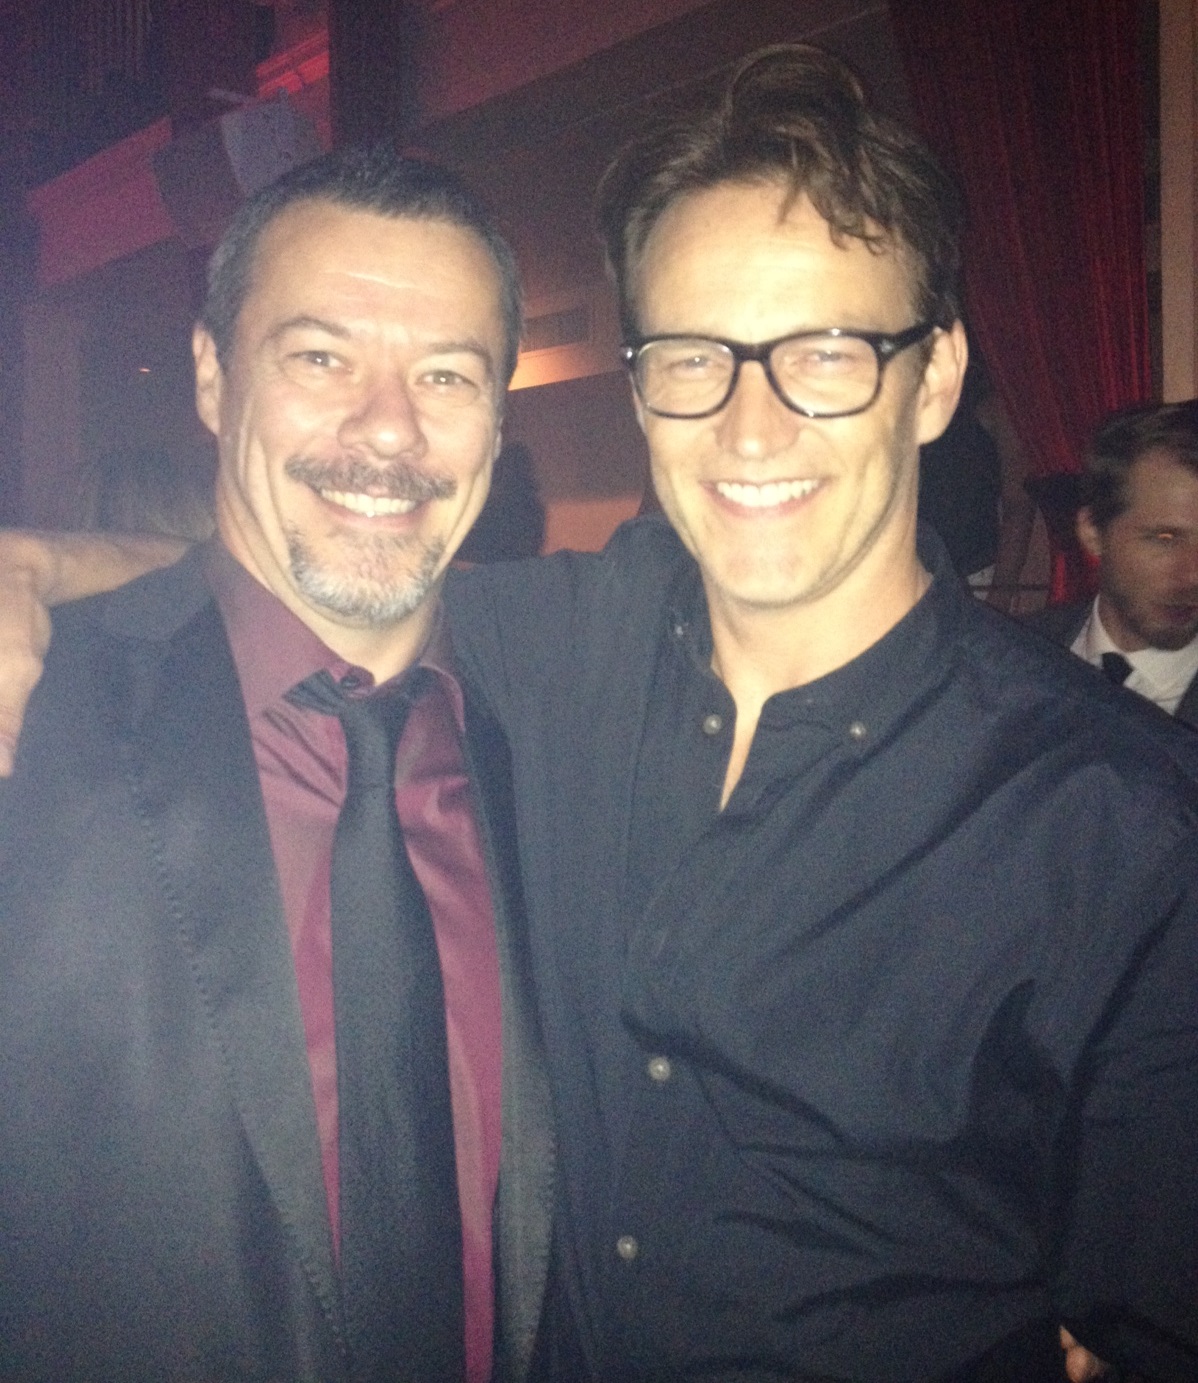 HBO True Blood wrap party with Stephen Koyer that directed Massi episode.